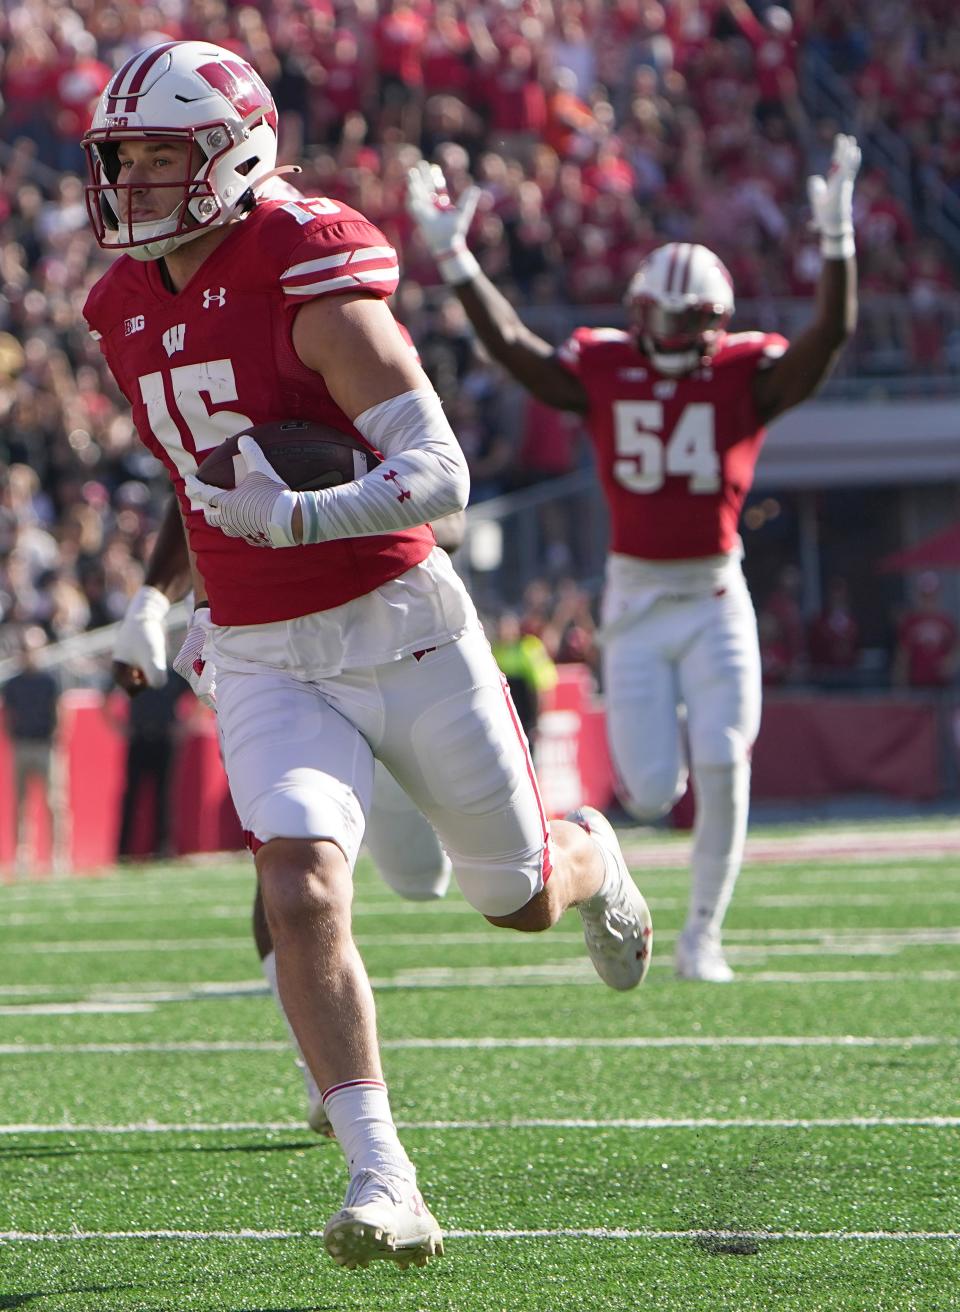 Wisconsin safety John Torchio (15) scores a touchdown after intercepting a pass thrown by Purdue quarterback Aidan O'Connell during the first quarter of their game at Camp Randall Stadium Saturday, October 22, 2022 in Madison, Wis.